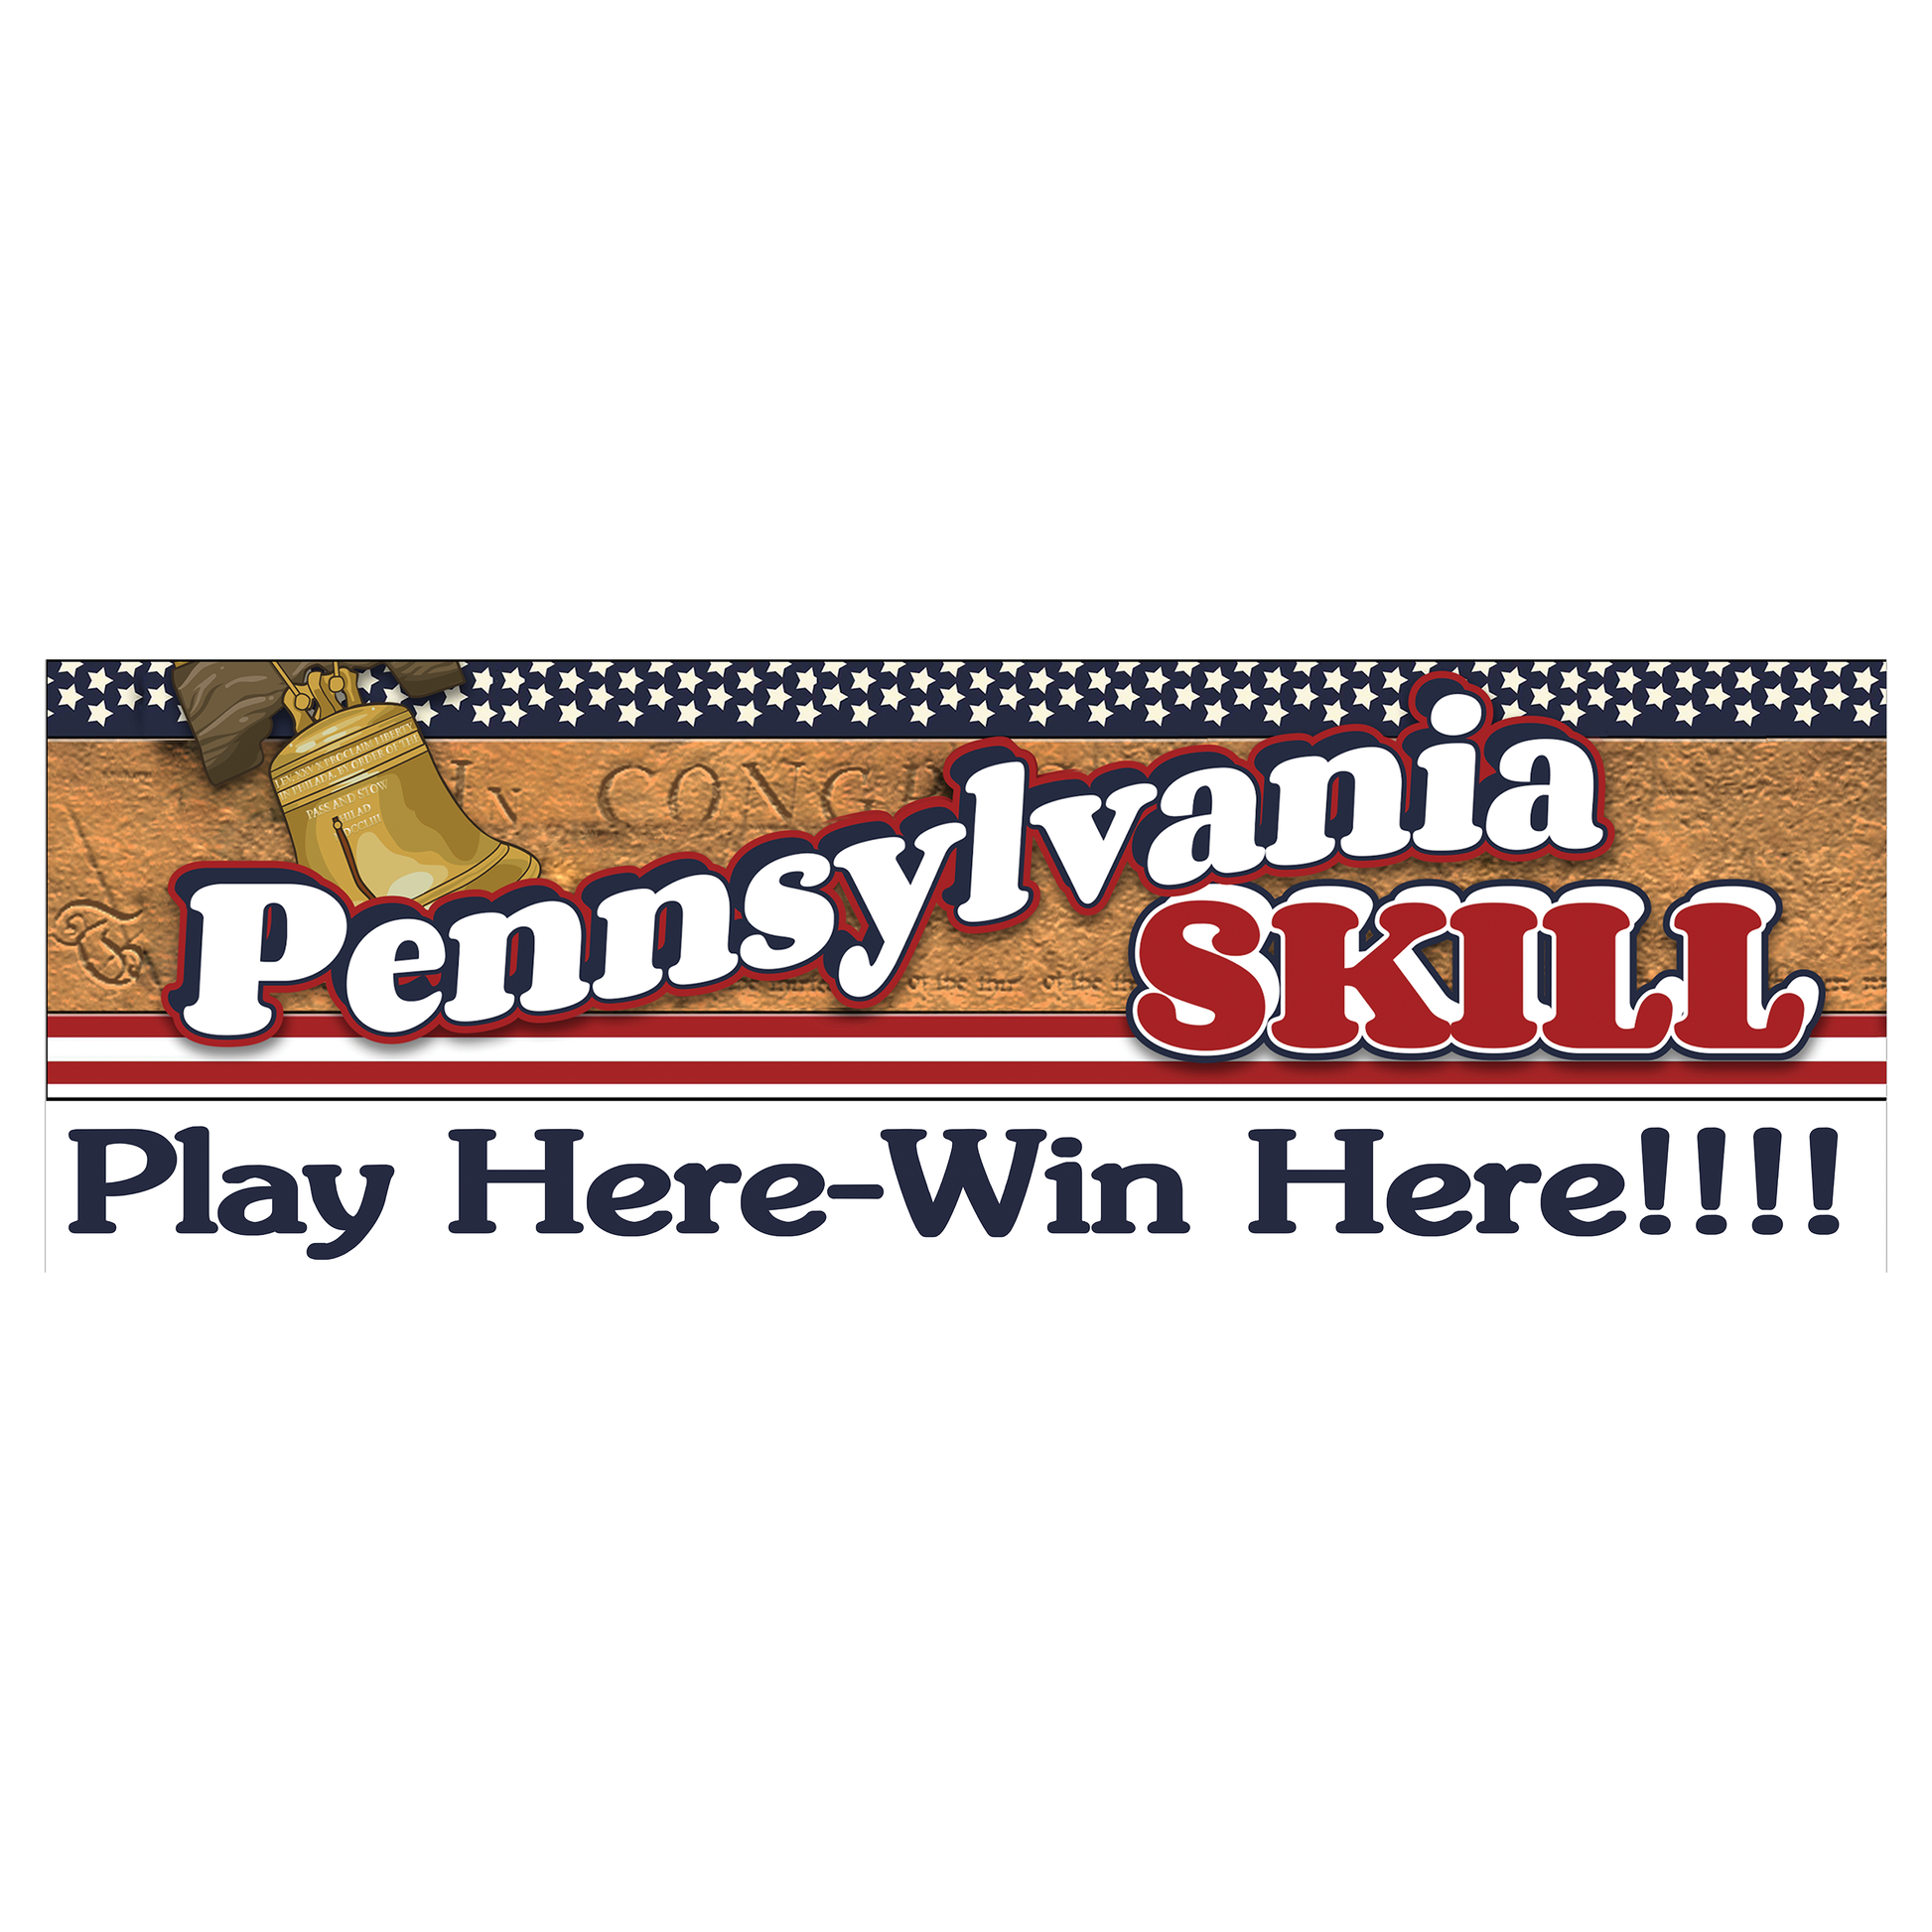 Promote your Pennsylvania Skill game(s) with a “Play Here/Win Here” Banner to market your location to the public.  Size: 6’ W x 2’ H